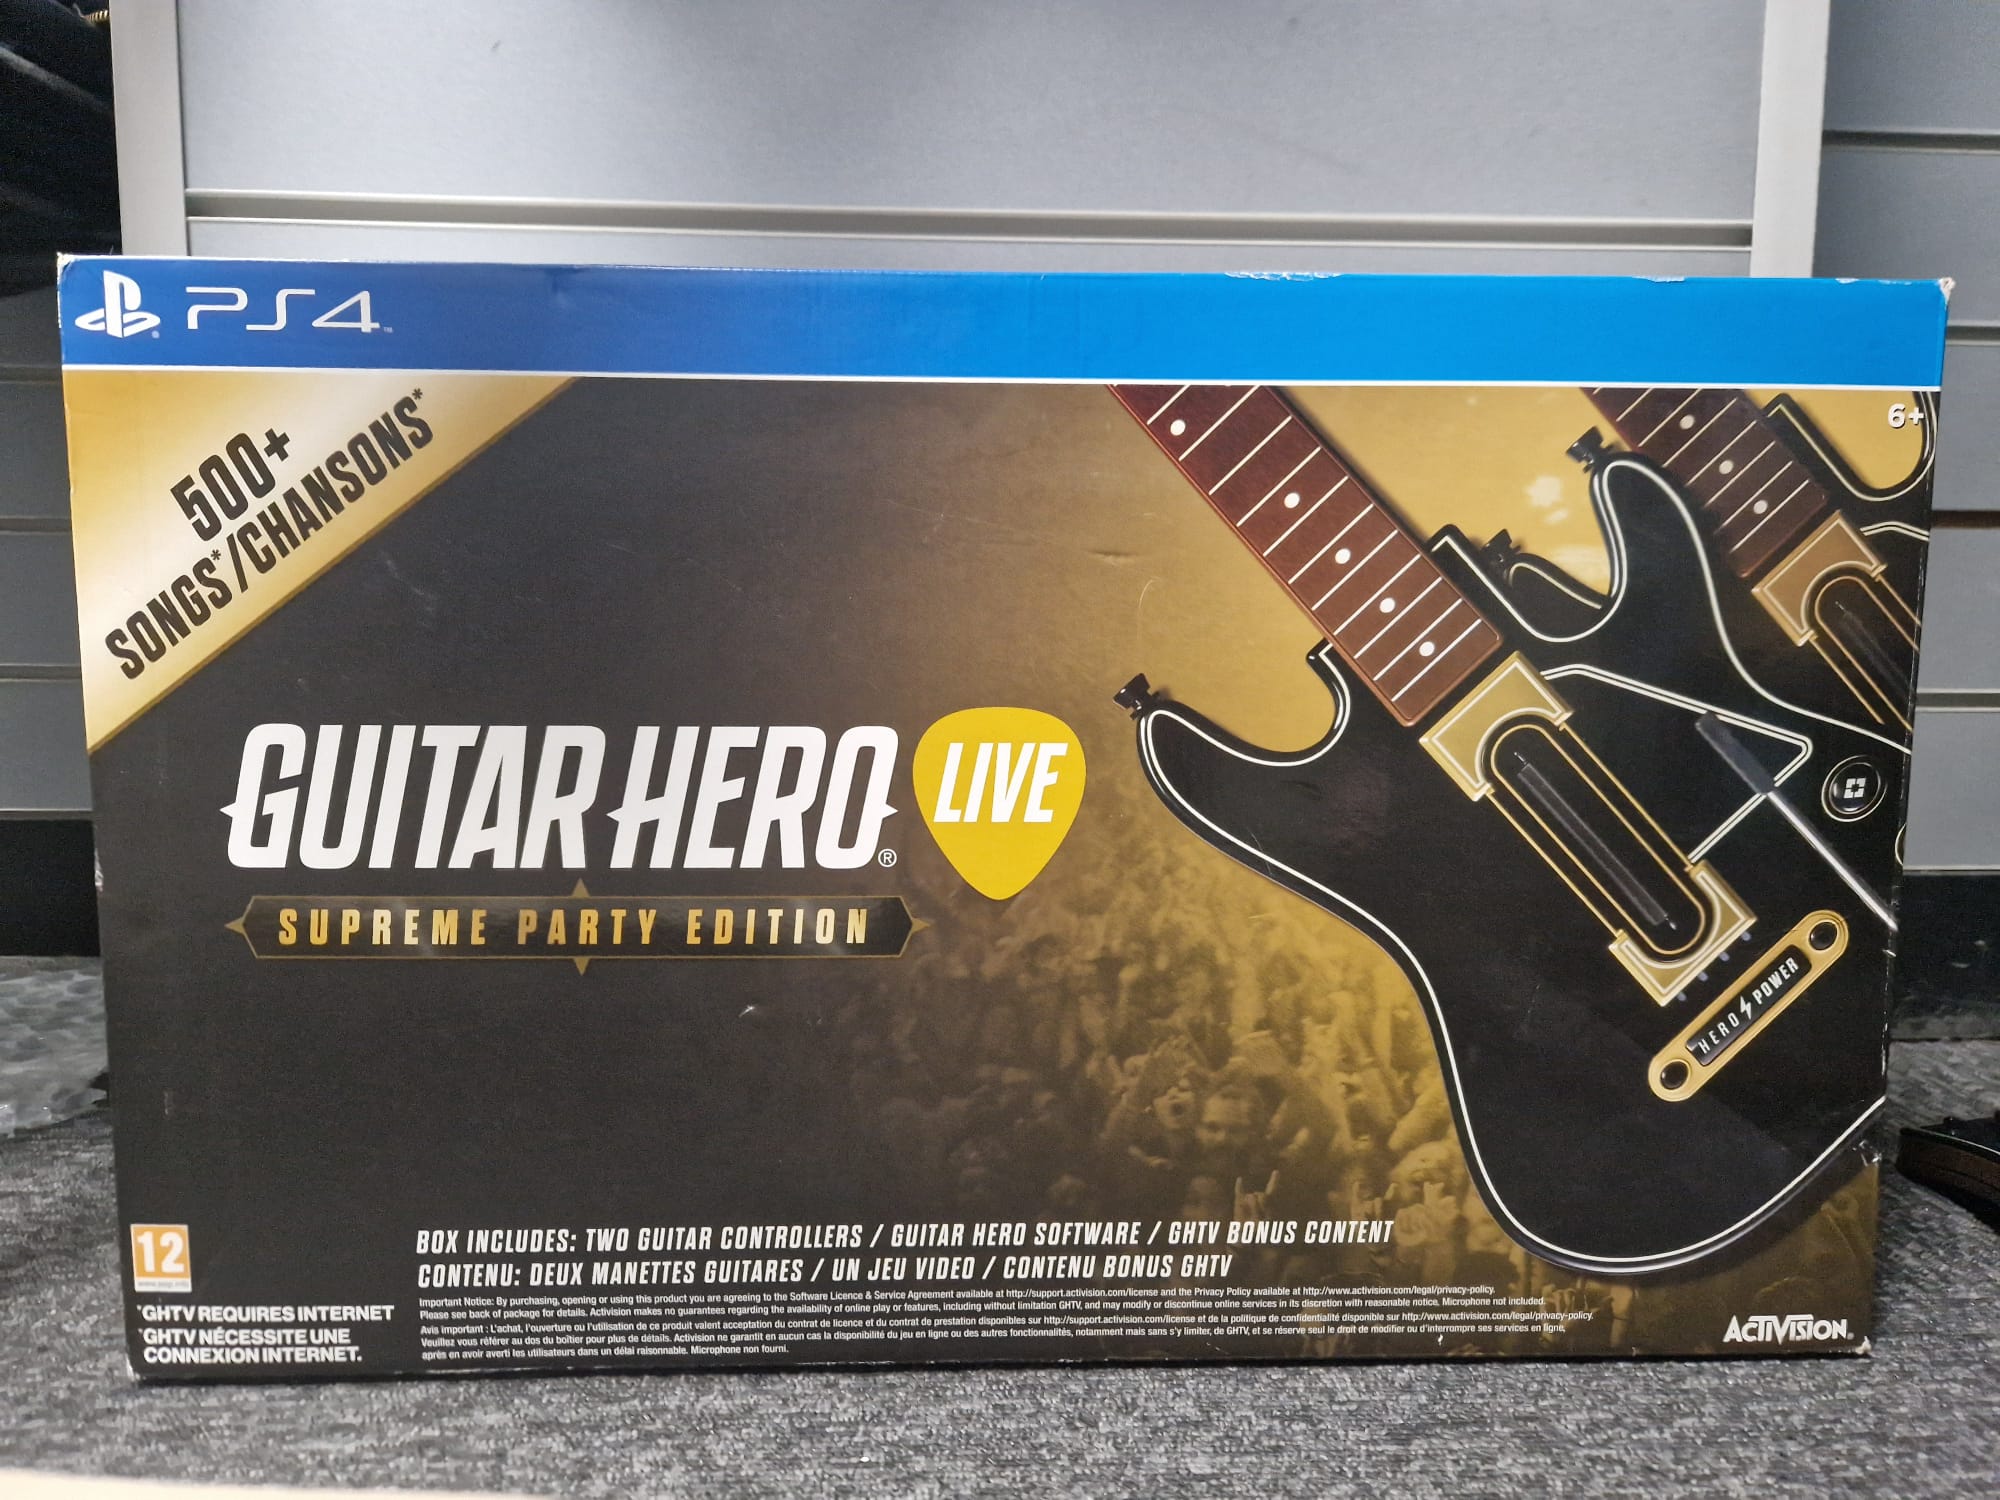 PS4 Guitar Hero Live Supreme Party Edition complete with both dongles